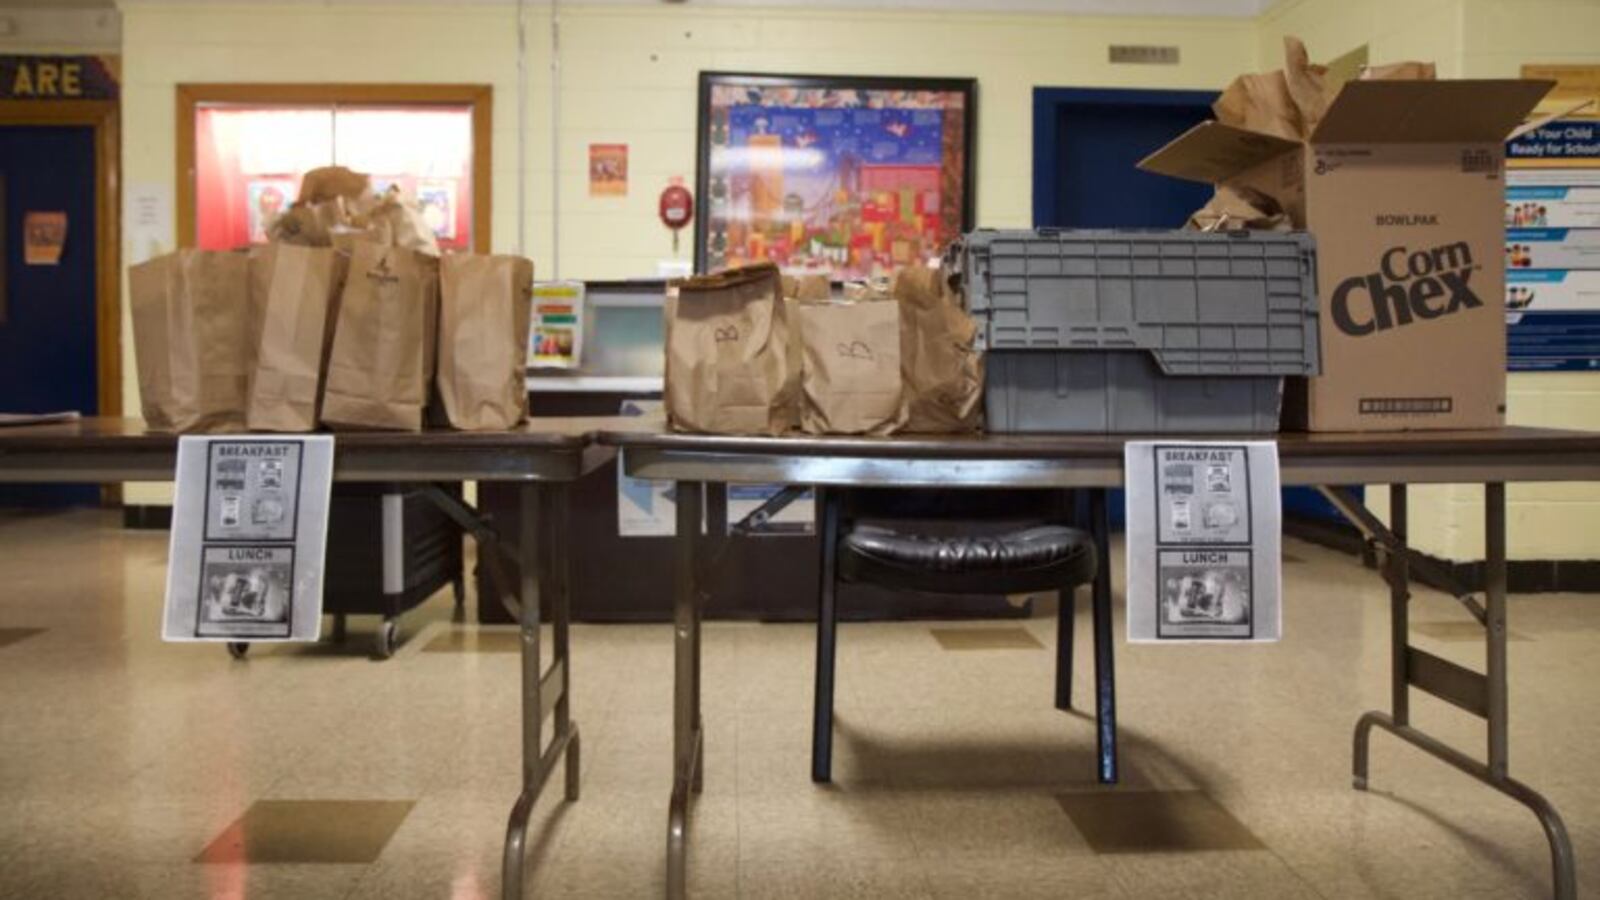 Bagged breakfast and lunches for students at Edward Gideon school during school shutdowns due to the coronavirus.